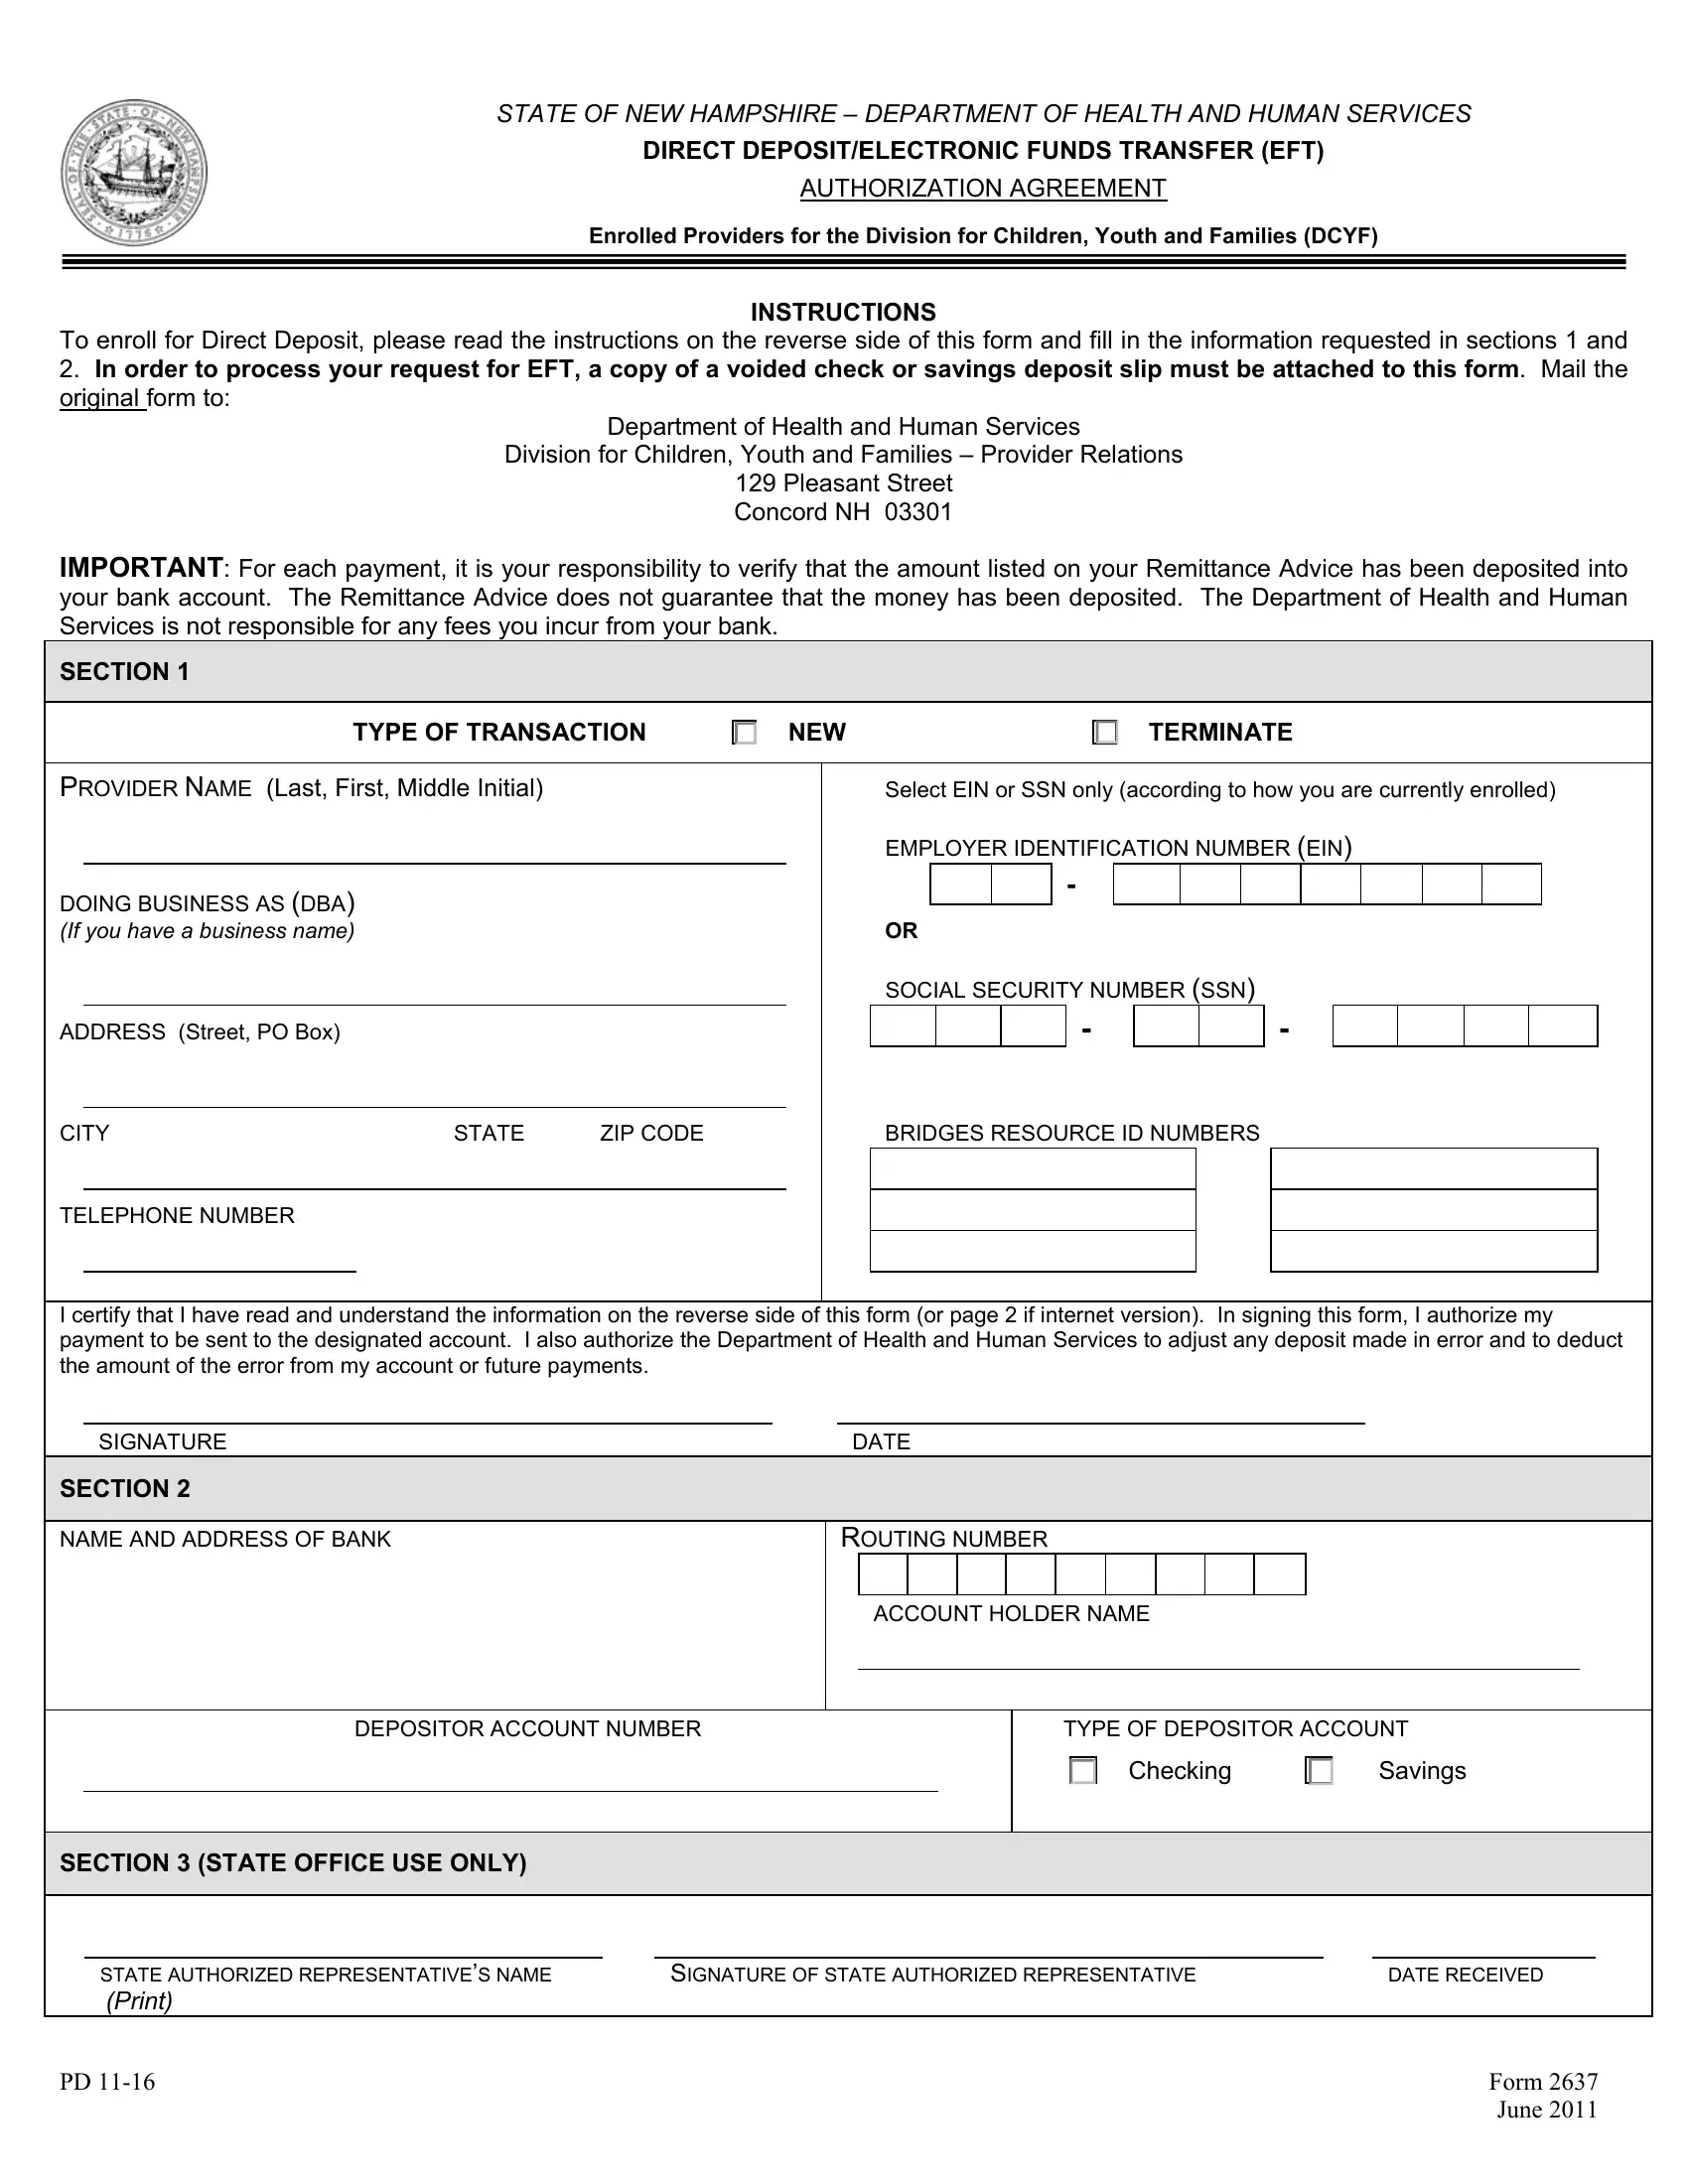 Dhhs Form 2637 ≡ Fill Out Printable PDF Forms Online